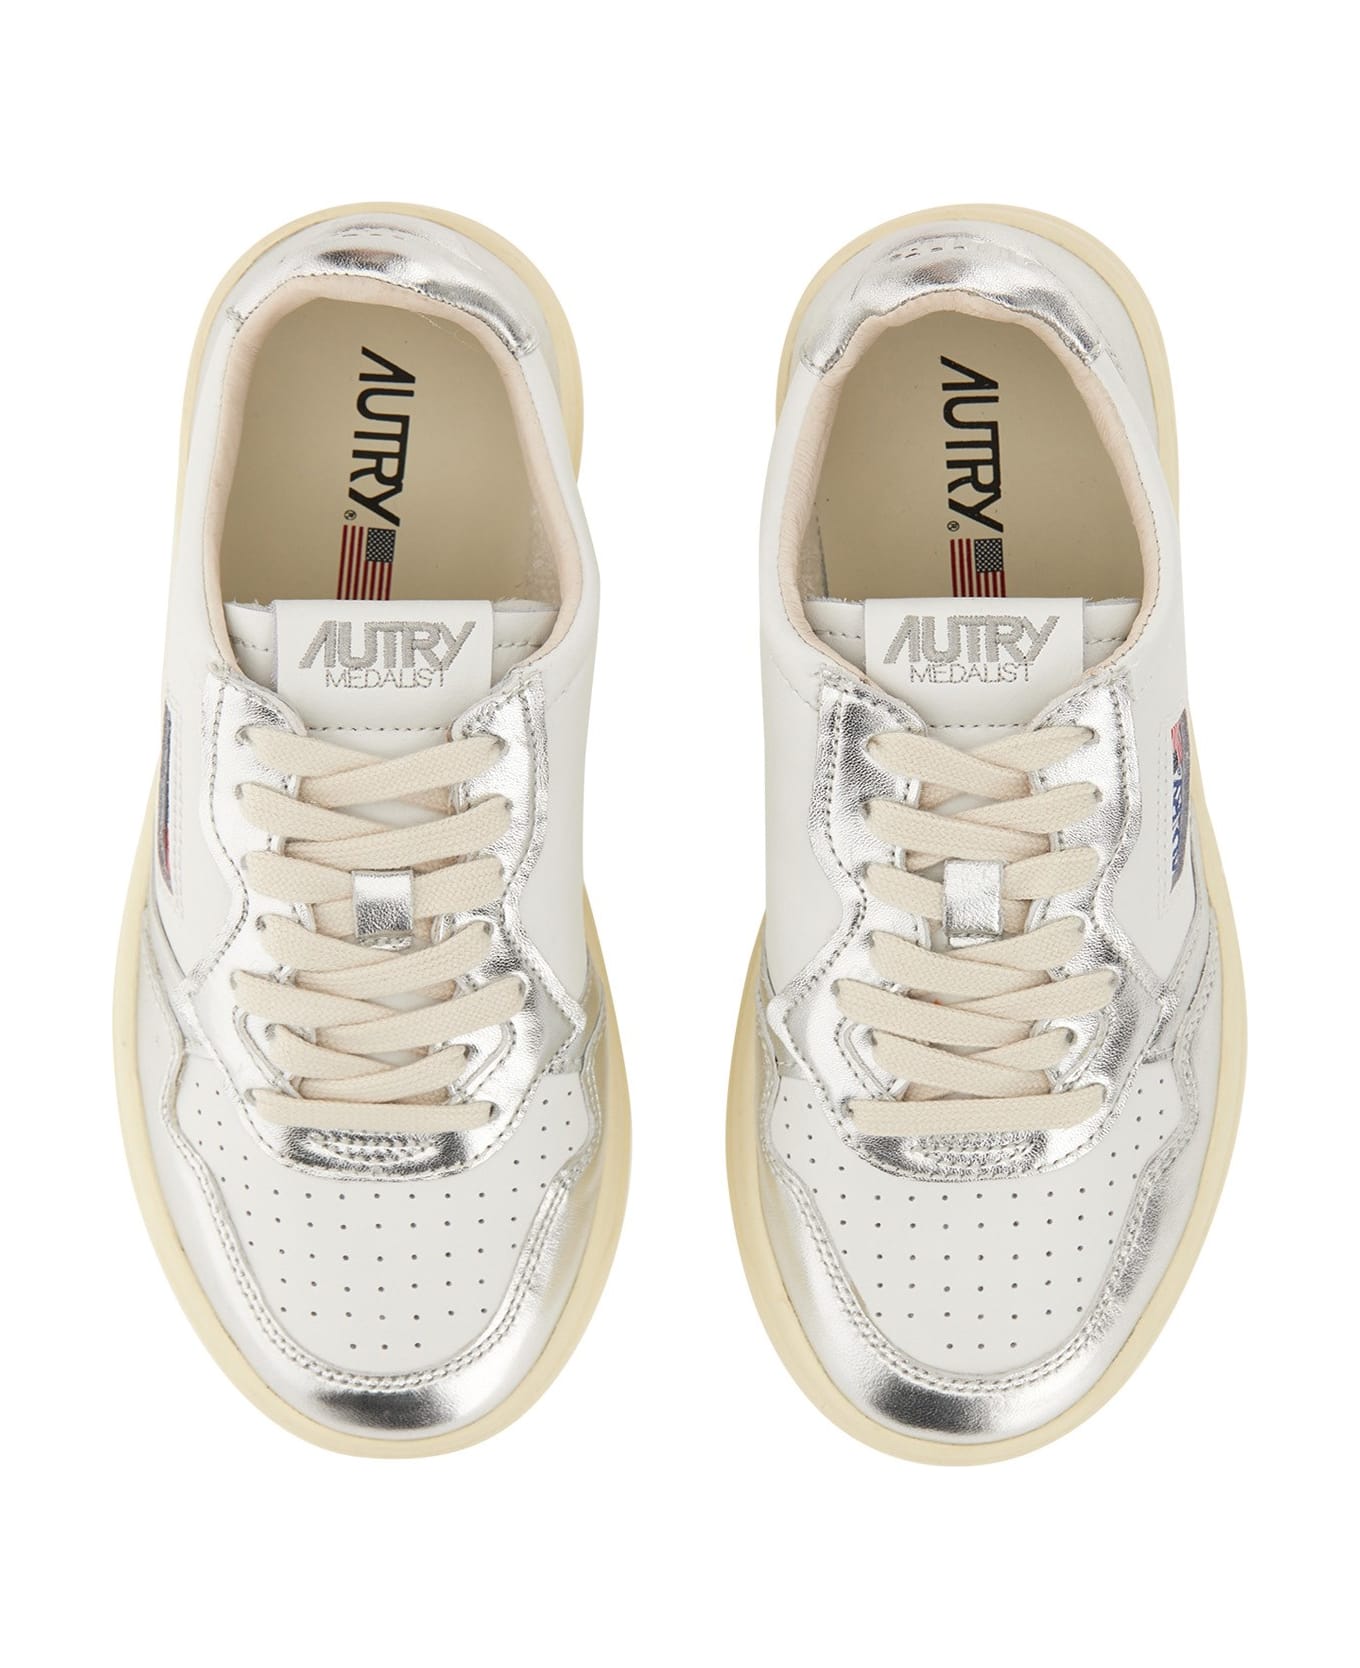 Autry Medalist Low Sneakers - White/silver スニーカー